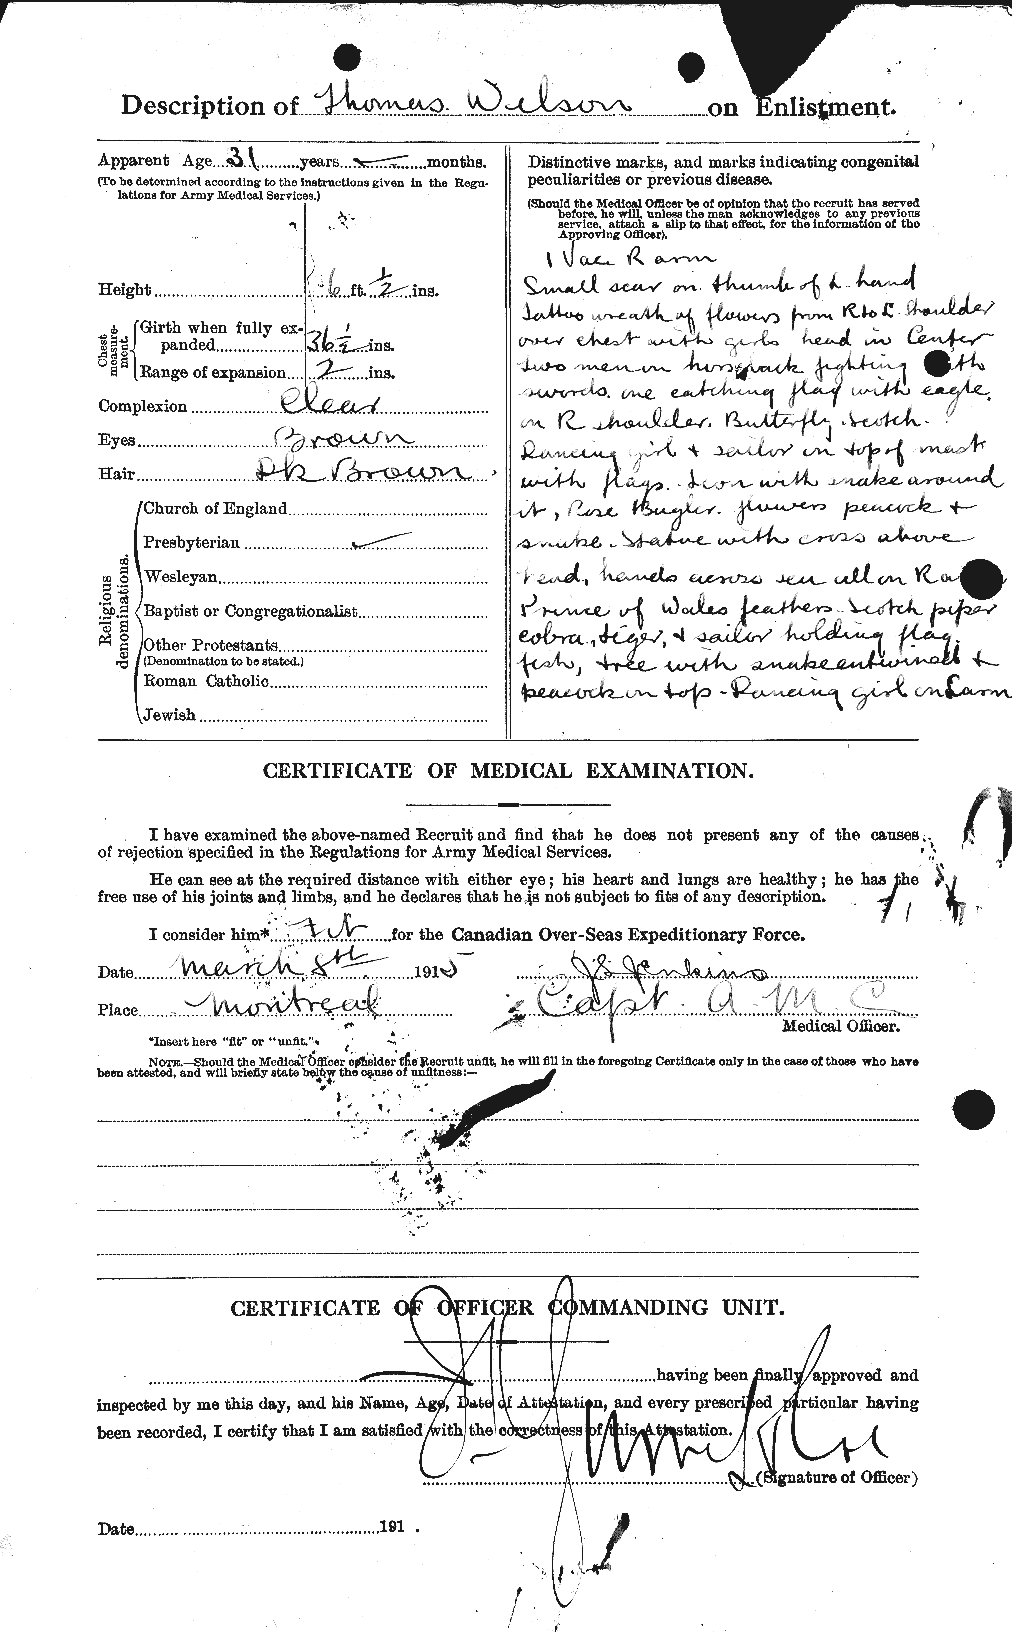 Personnel Records of the First World War - CEF 681203b